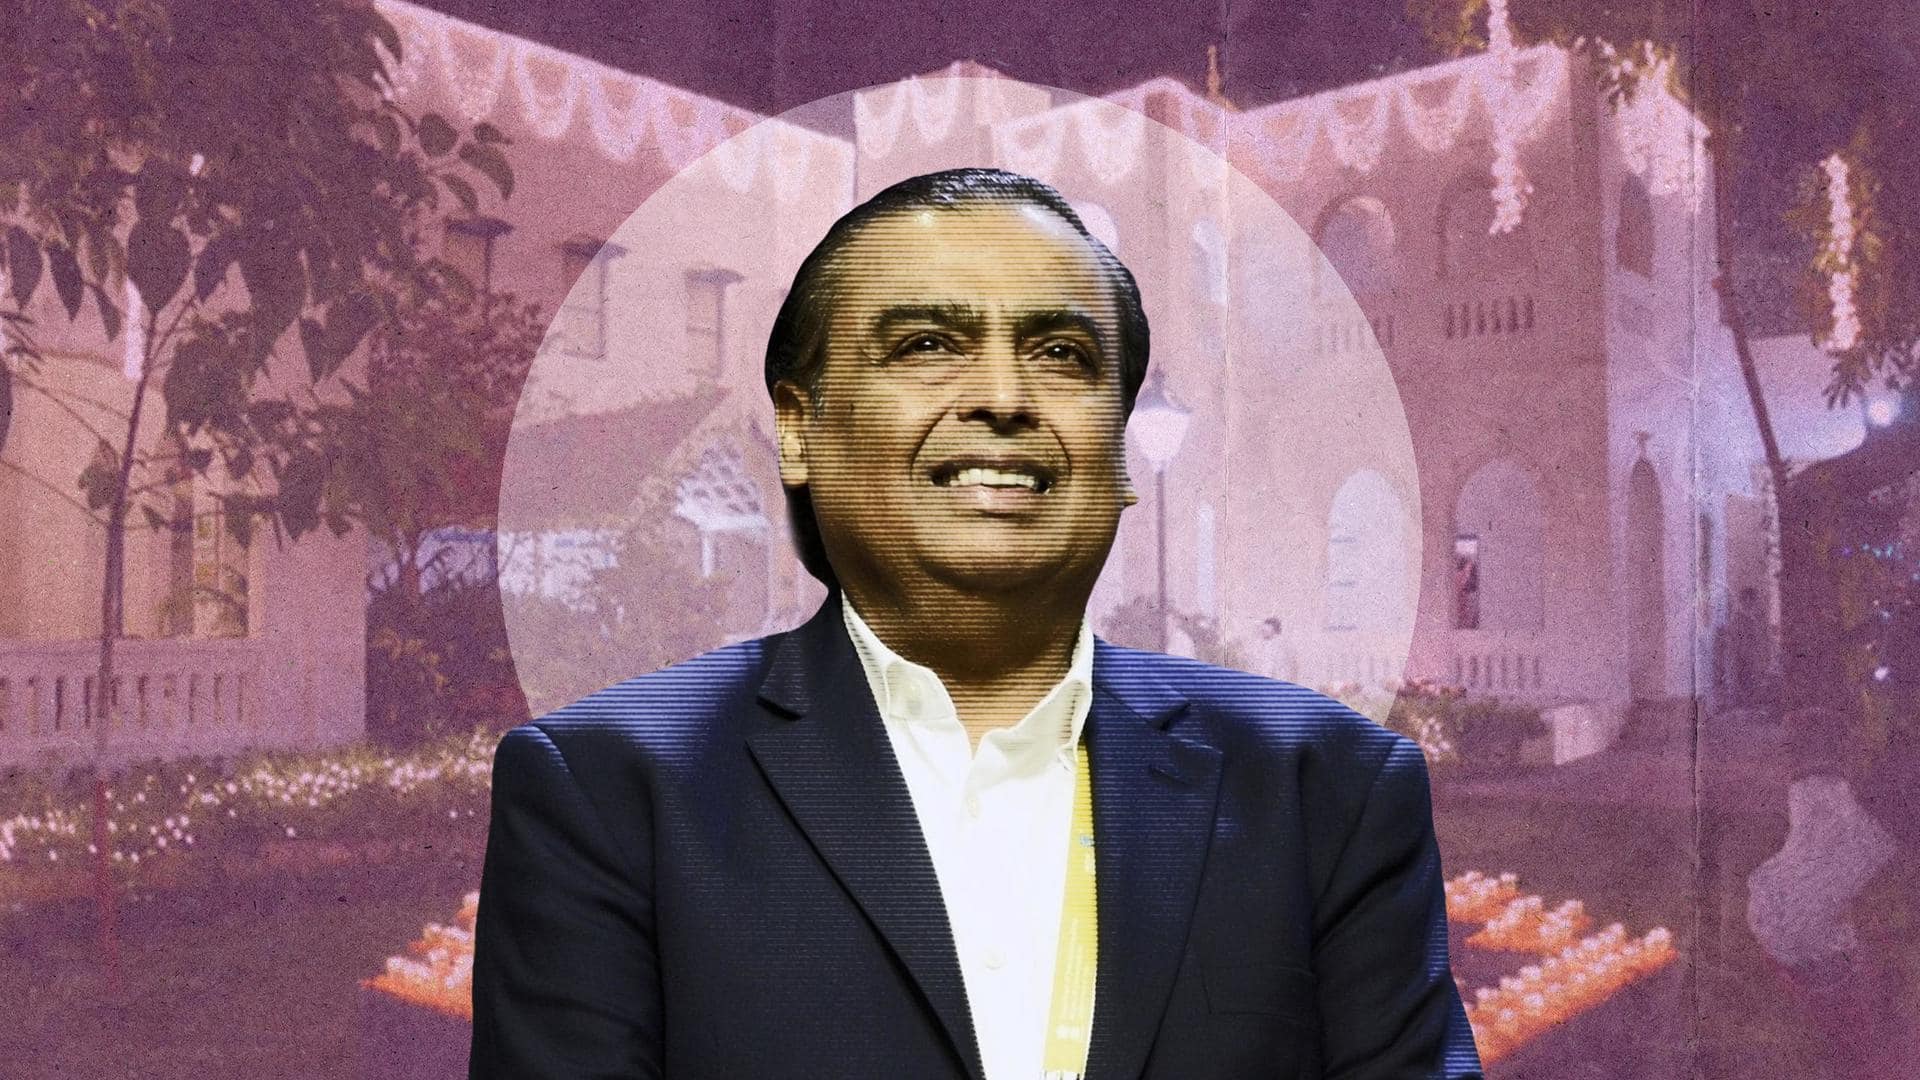 You can visit Ambani's luxurious ancestral home at Rs. 2